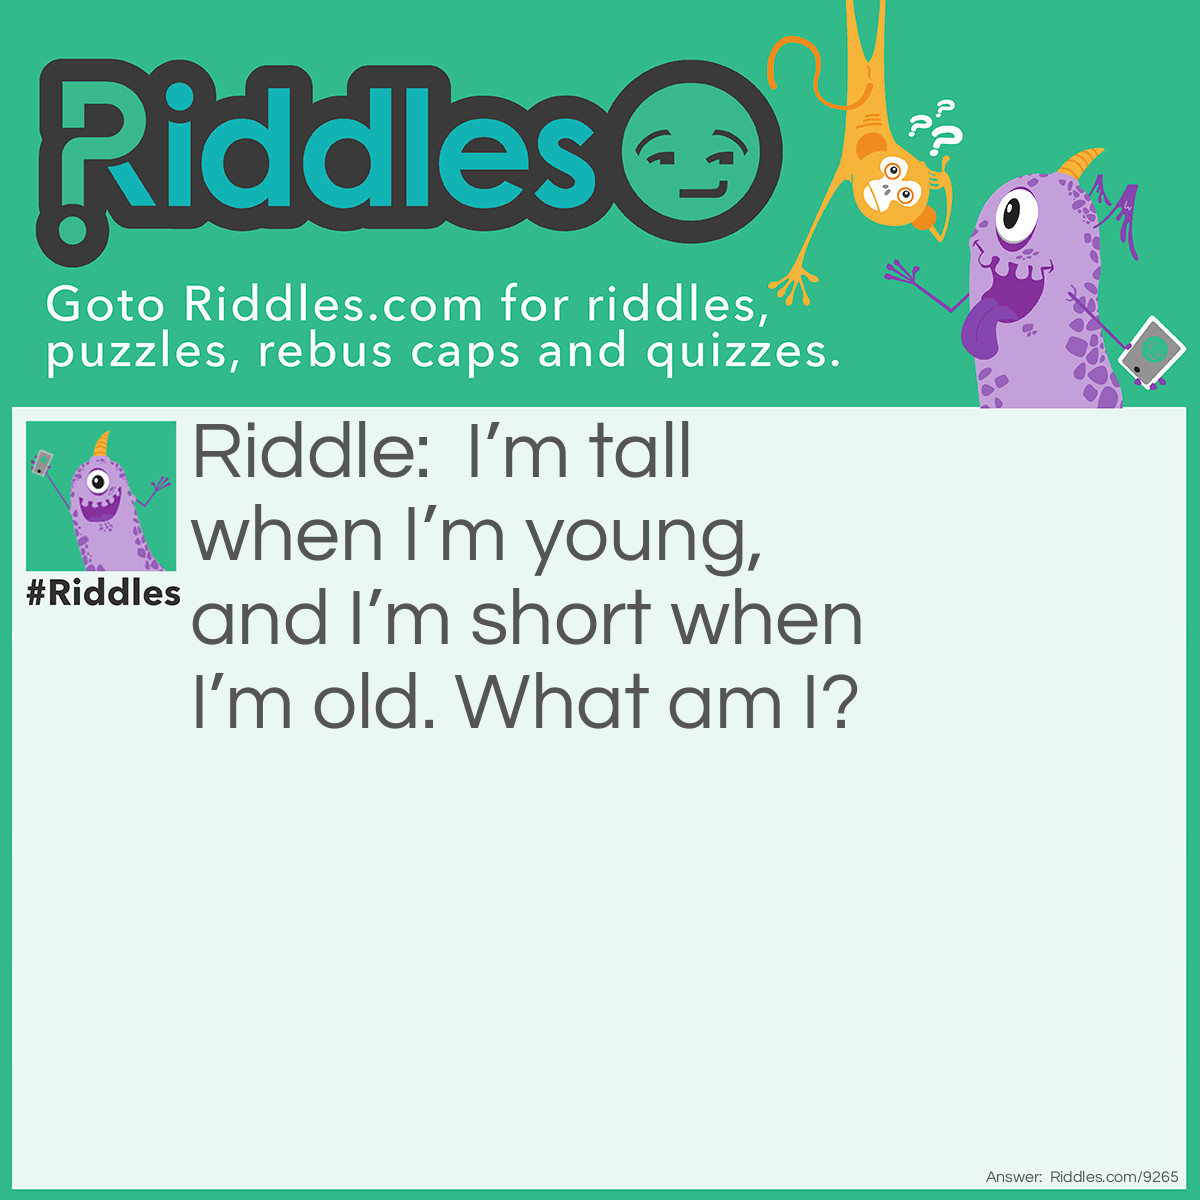 Riddle: I'm tall when I'm young, and I'm short when I'm old. What am I? Answer: A candle